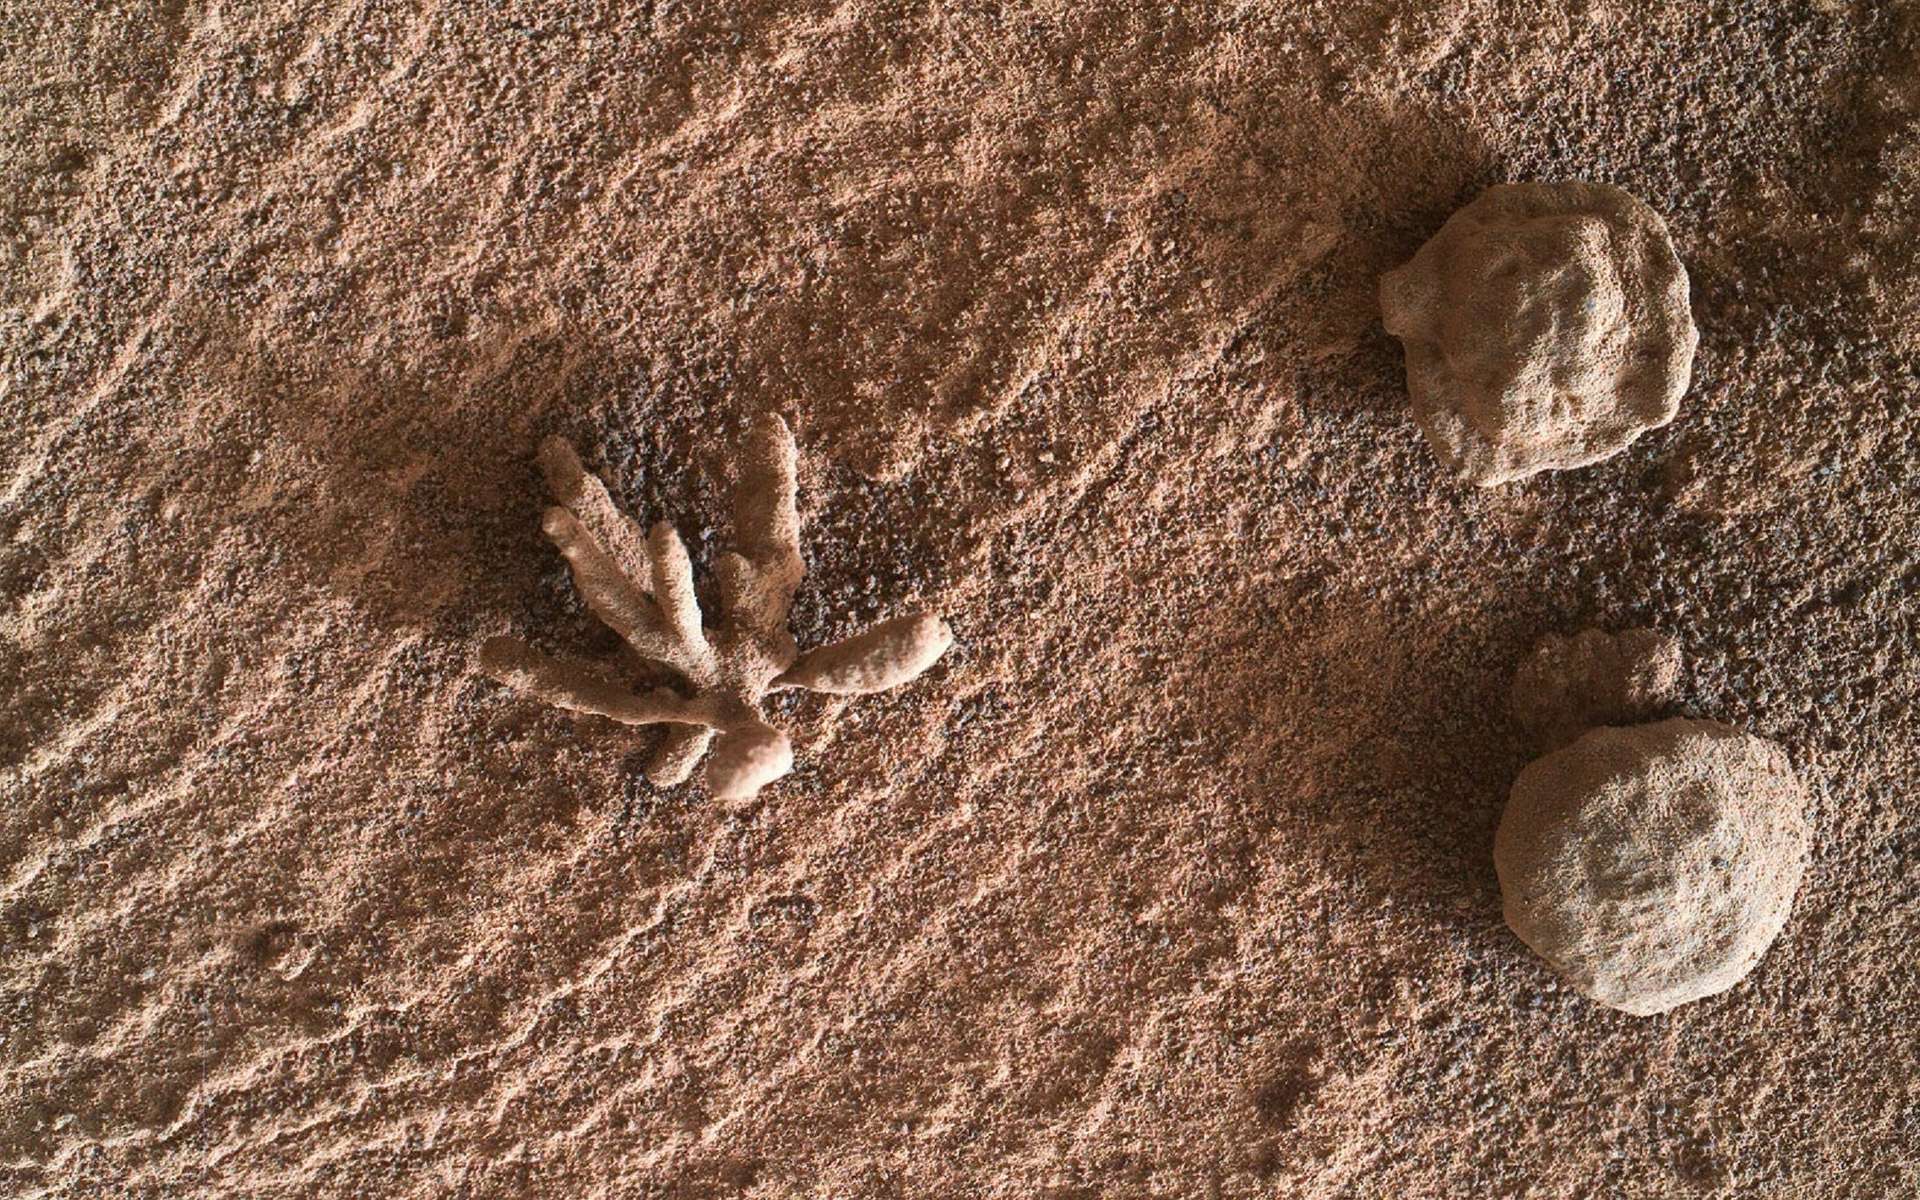 The discovery of a wonderful “metal flower” on the surface of Mars